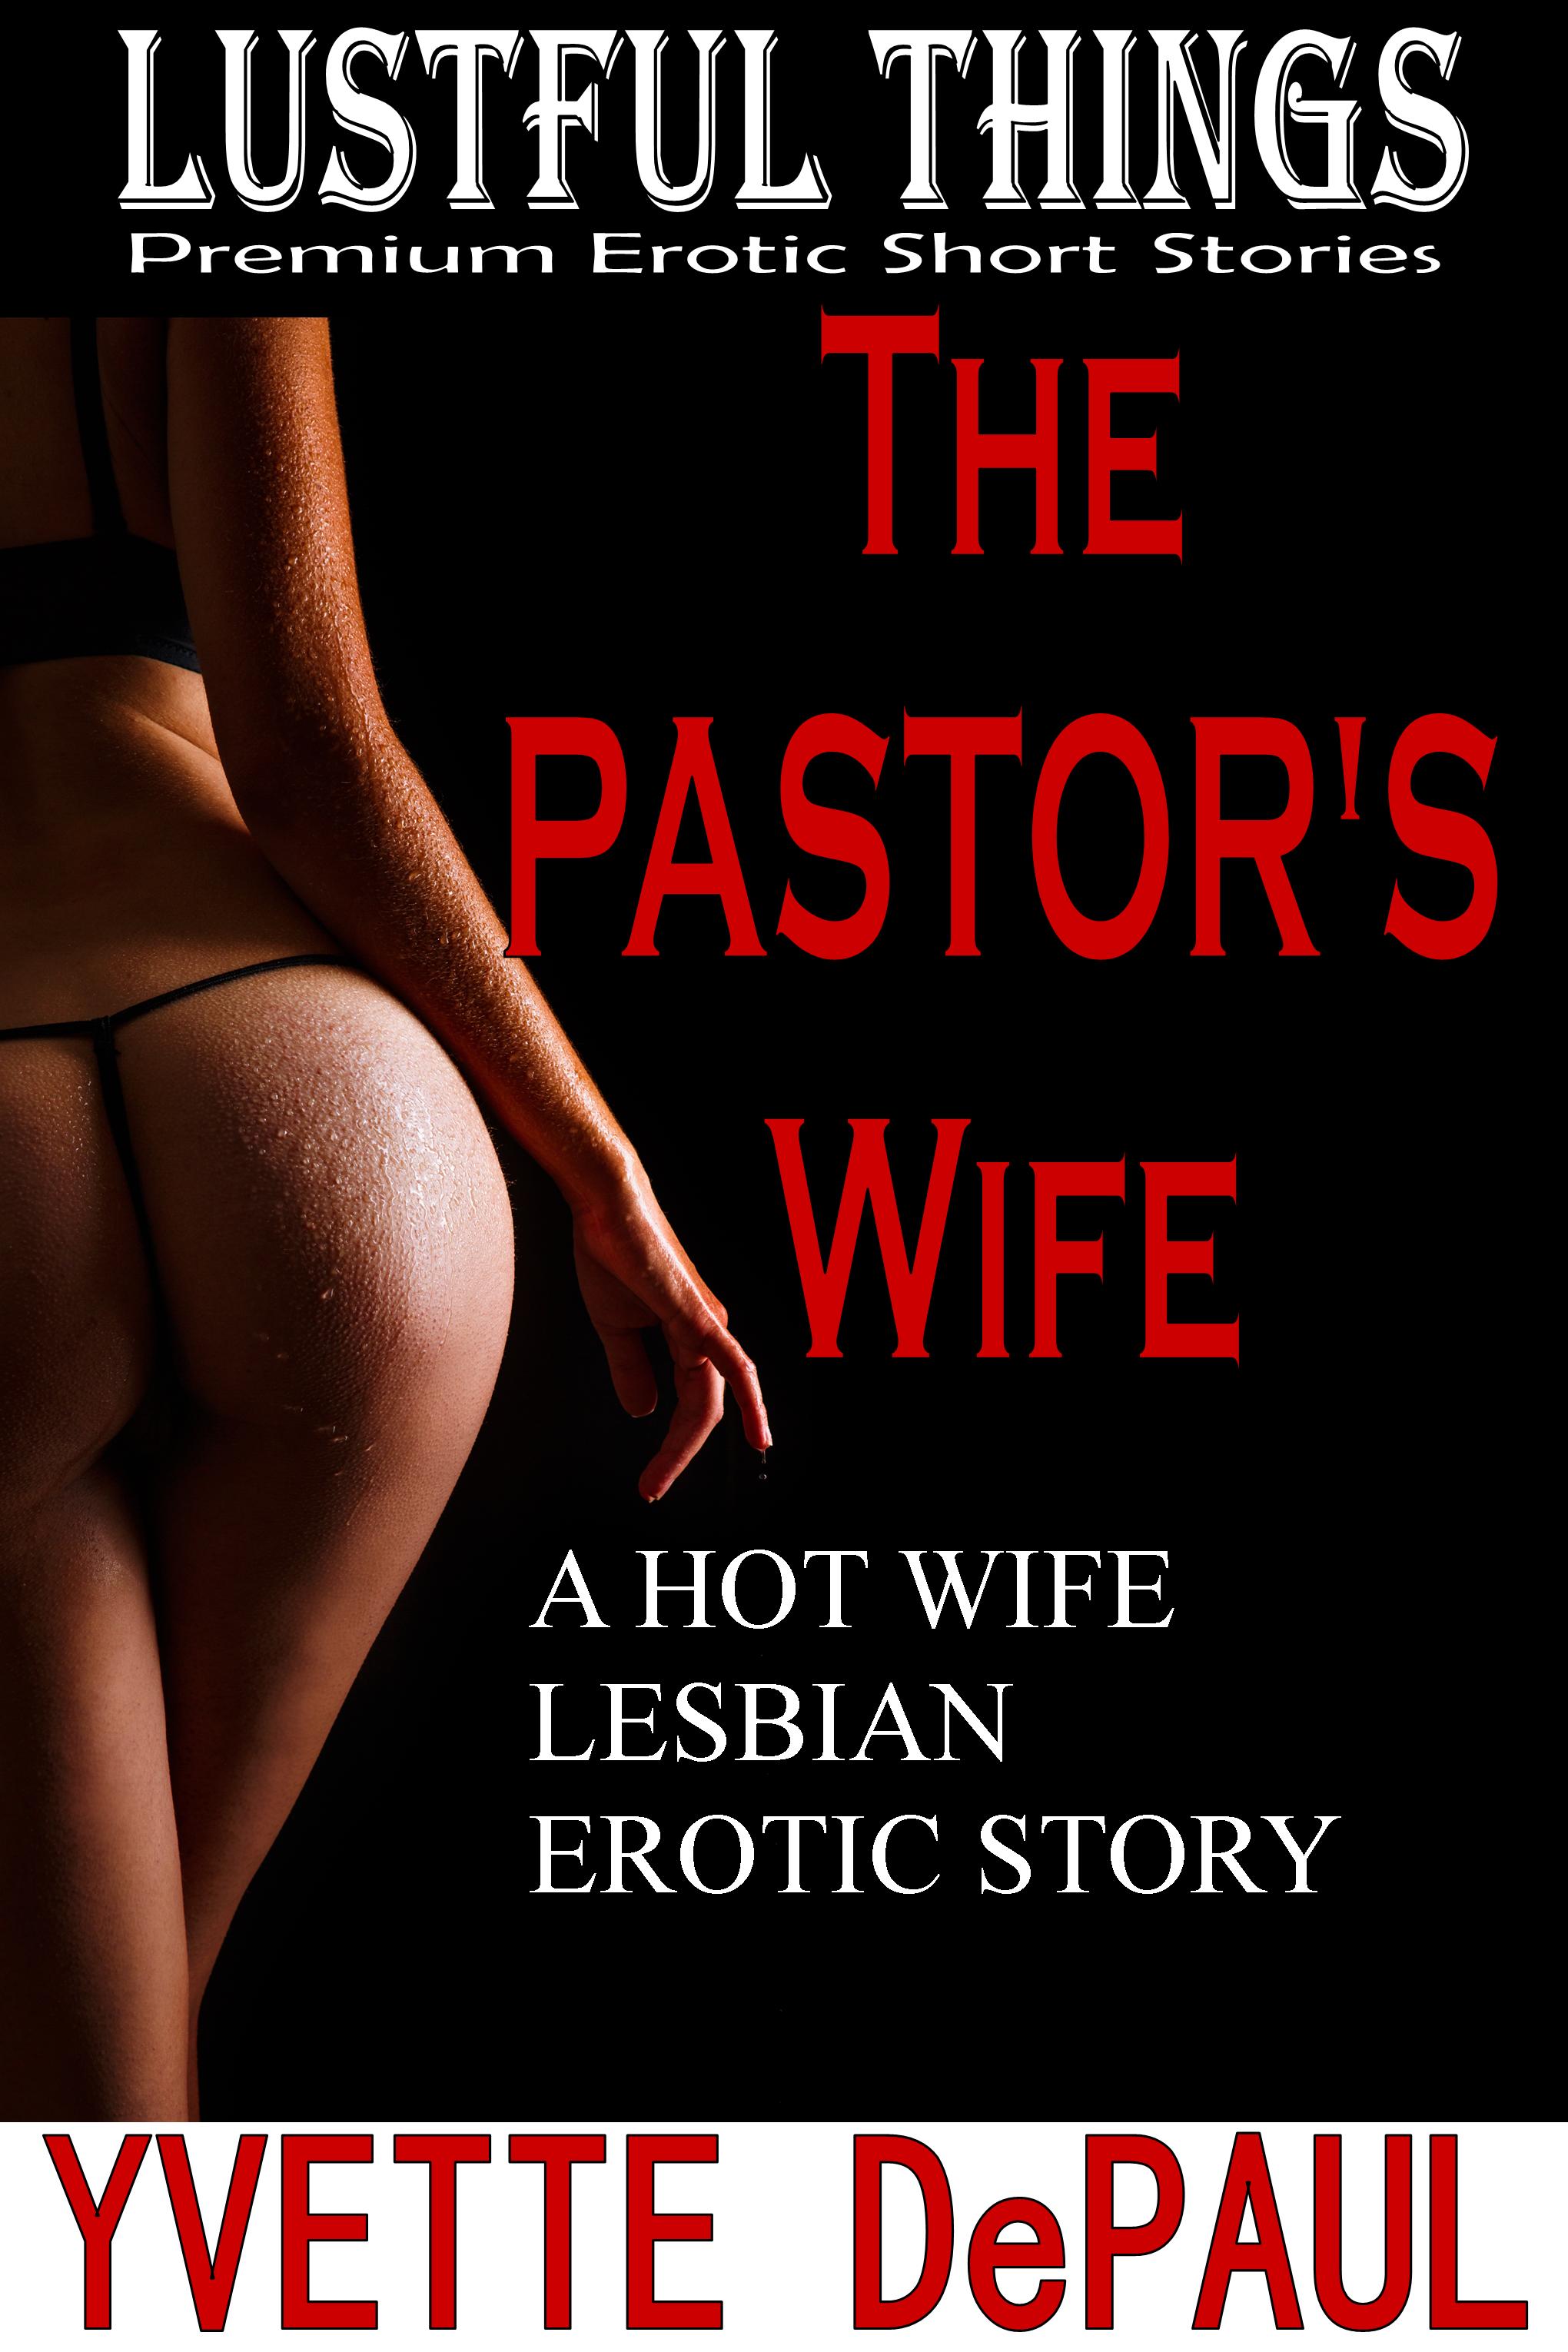 Smashwords – The Pastors WifeA Hot Wife Lesbian Erotic Story – a book by Yvette DePaul